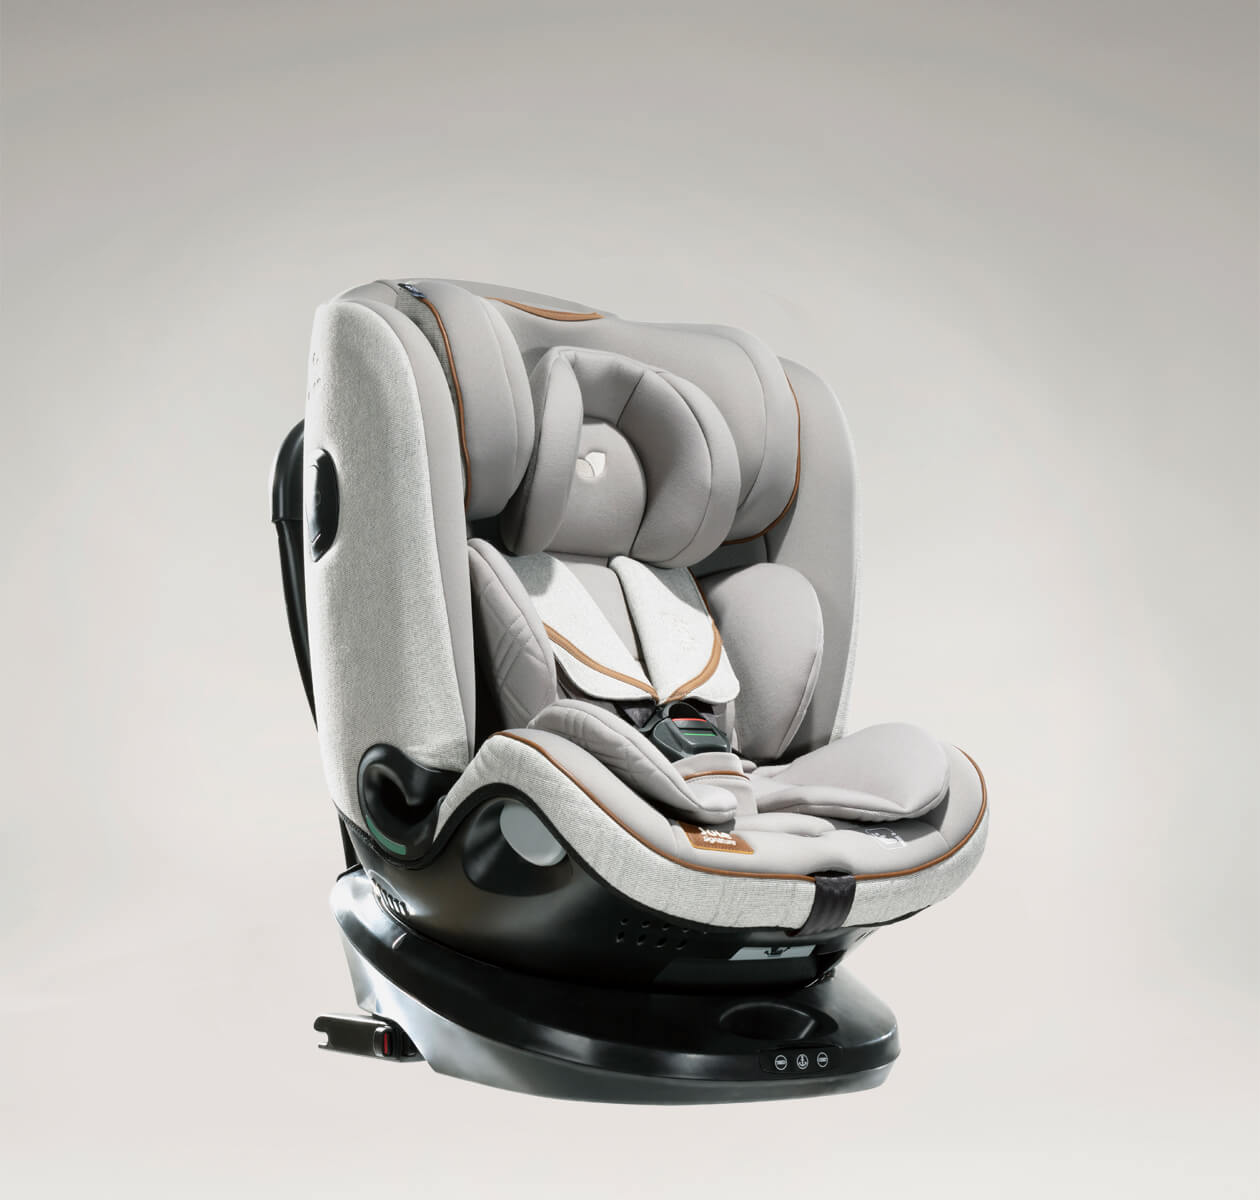 https://dd.joiebaby.com/media/catalog/product/p/1/p1joie-signature-child-car-seat-ispingrow-oyster-on-base-infant-inserts_1.jpg?type=product&height=265&width=265